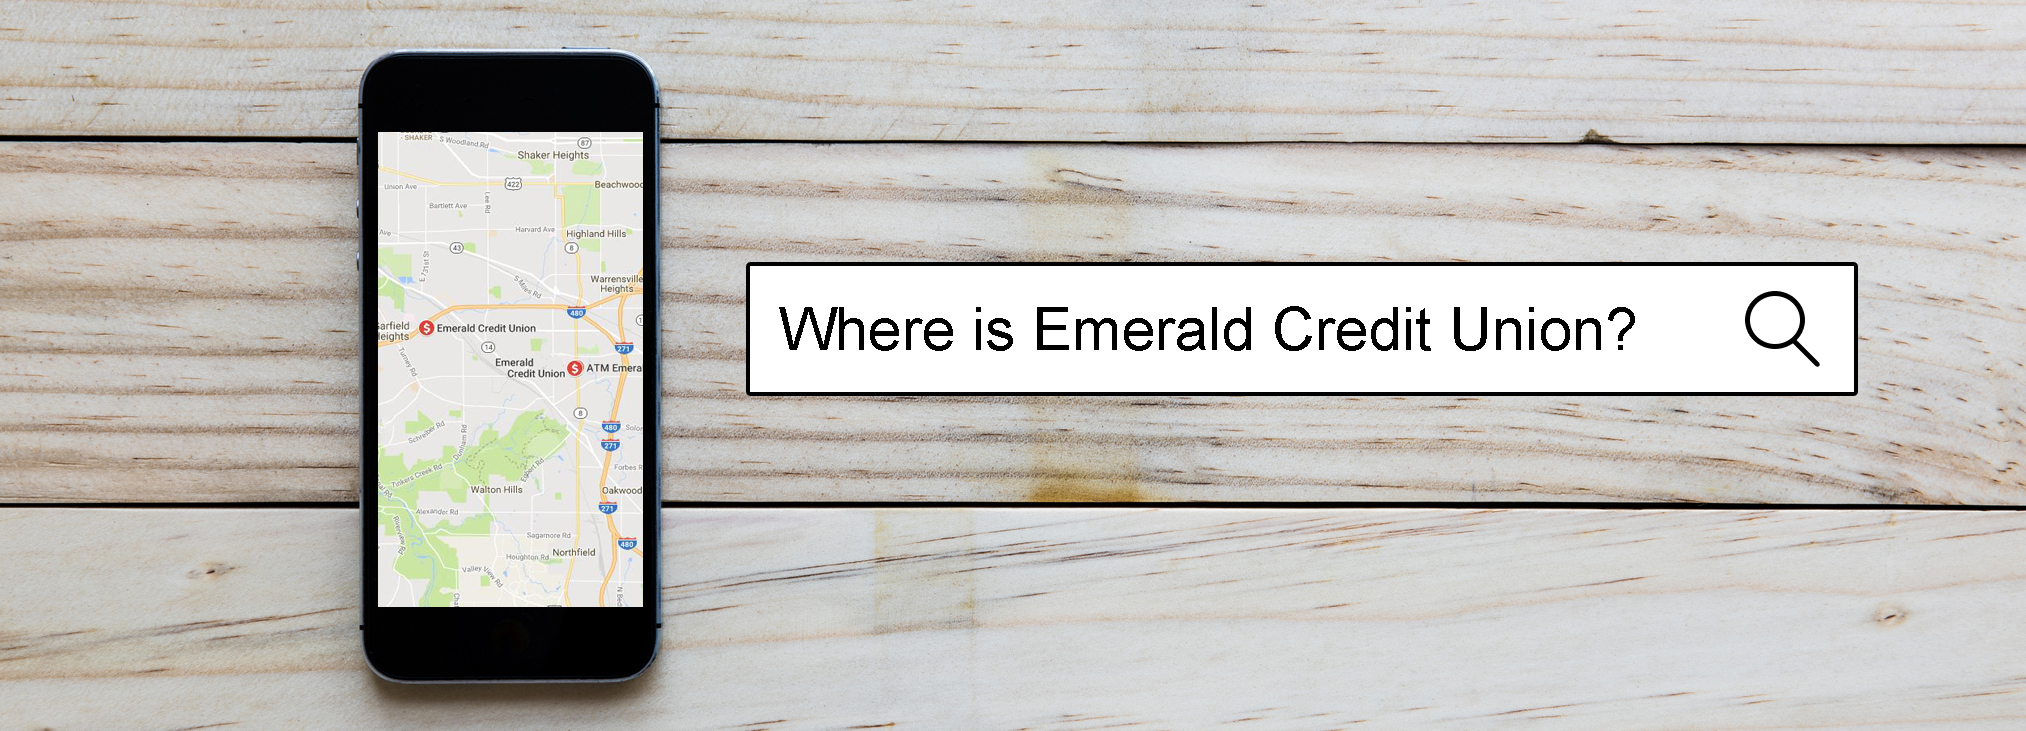 Where is Emerald Credit Union?